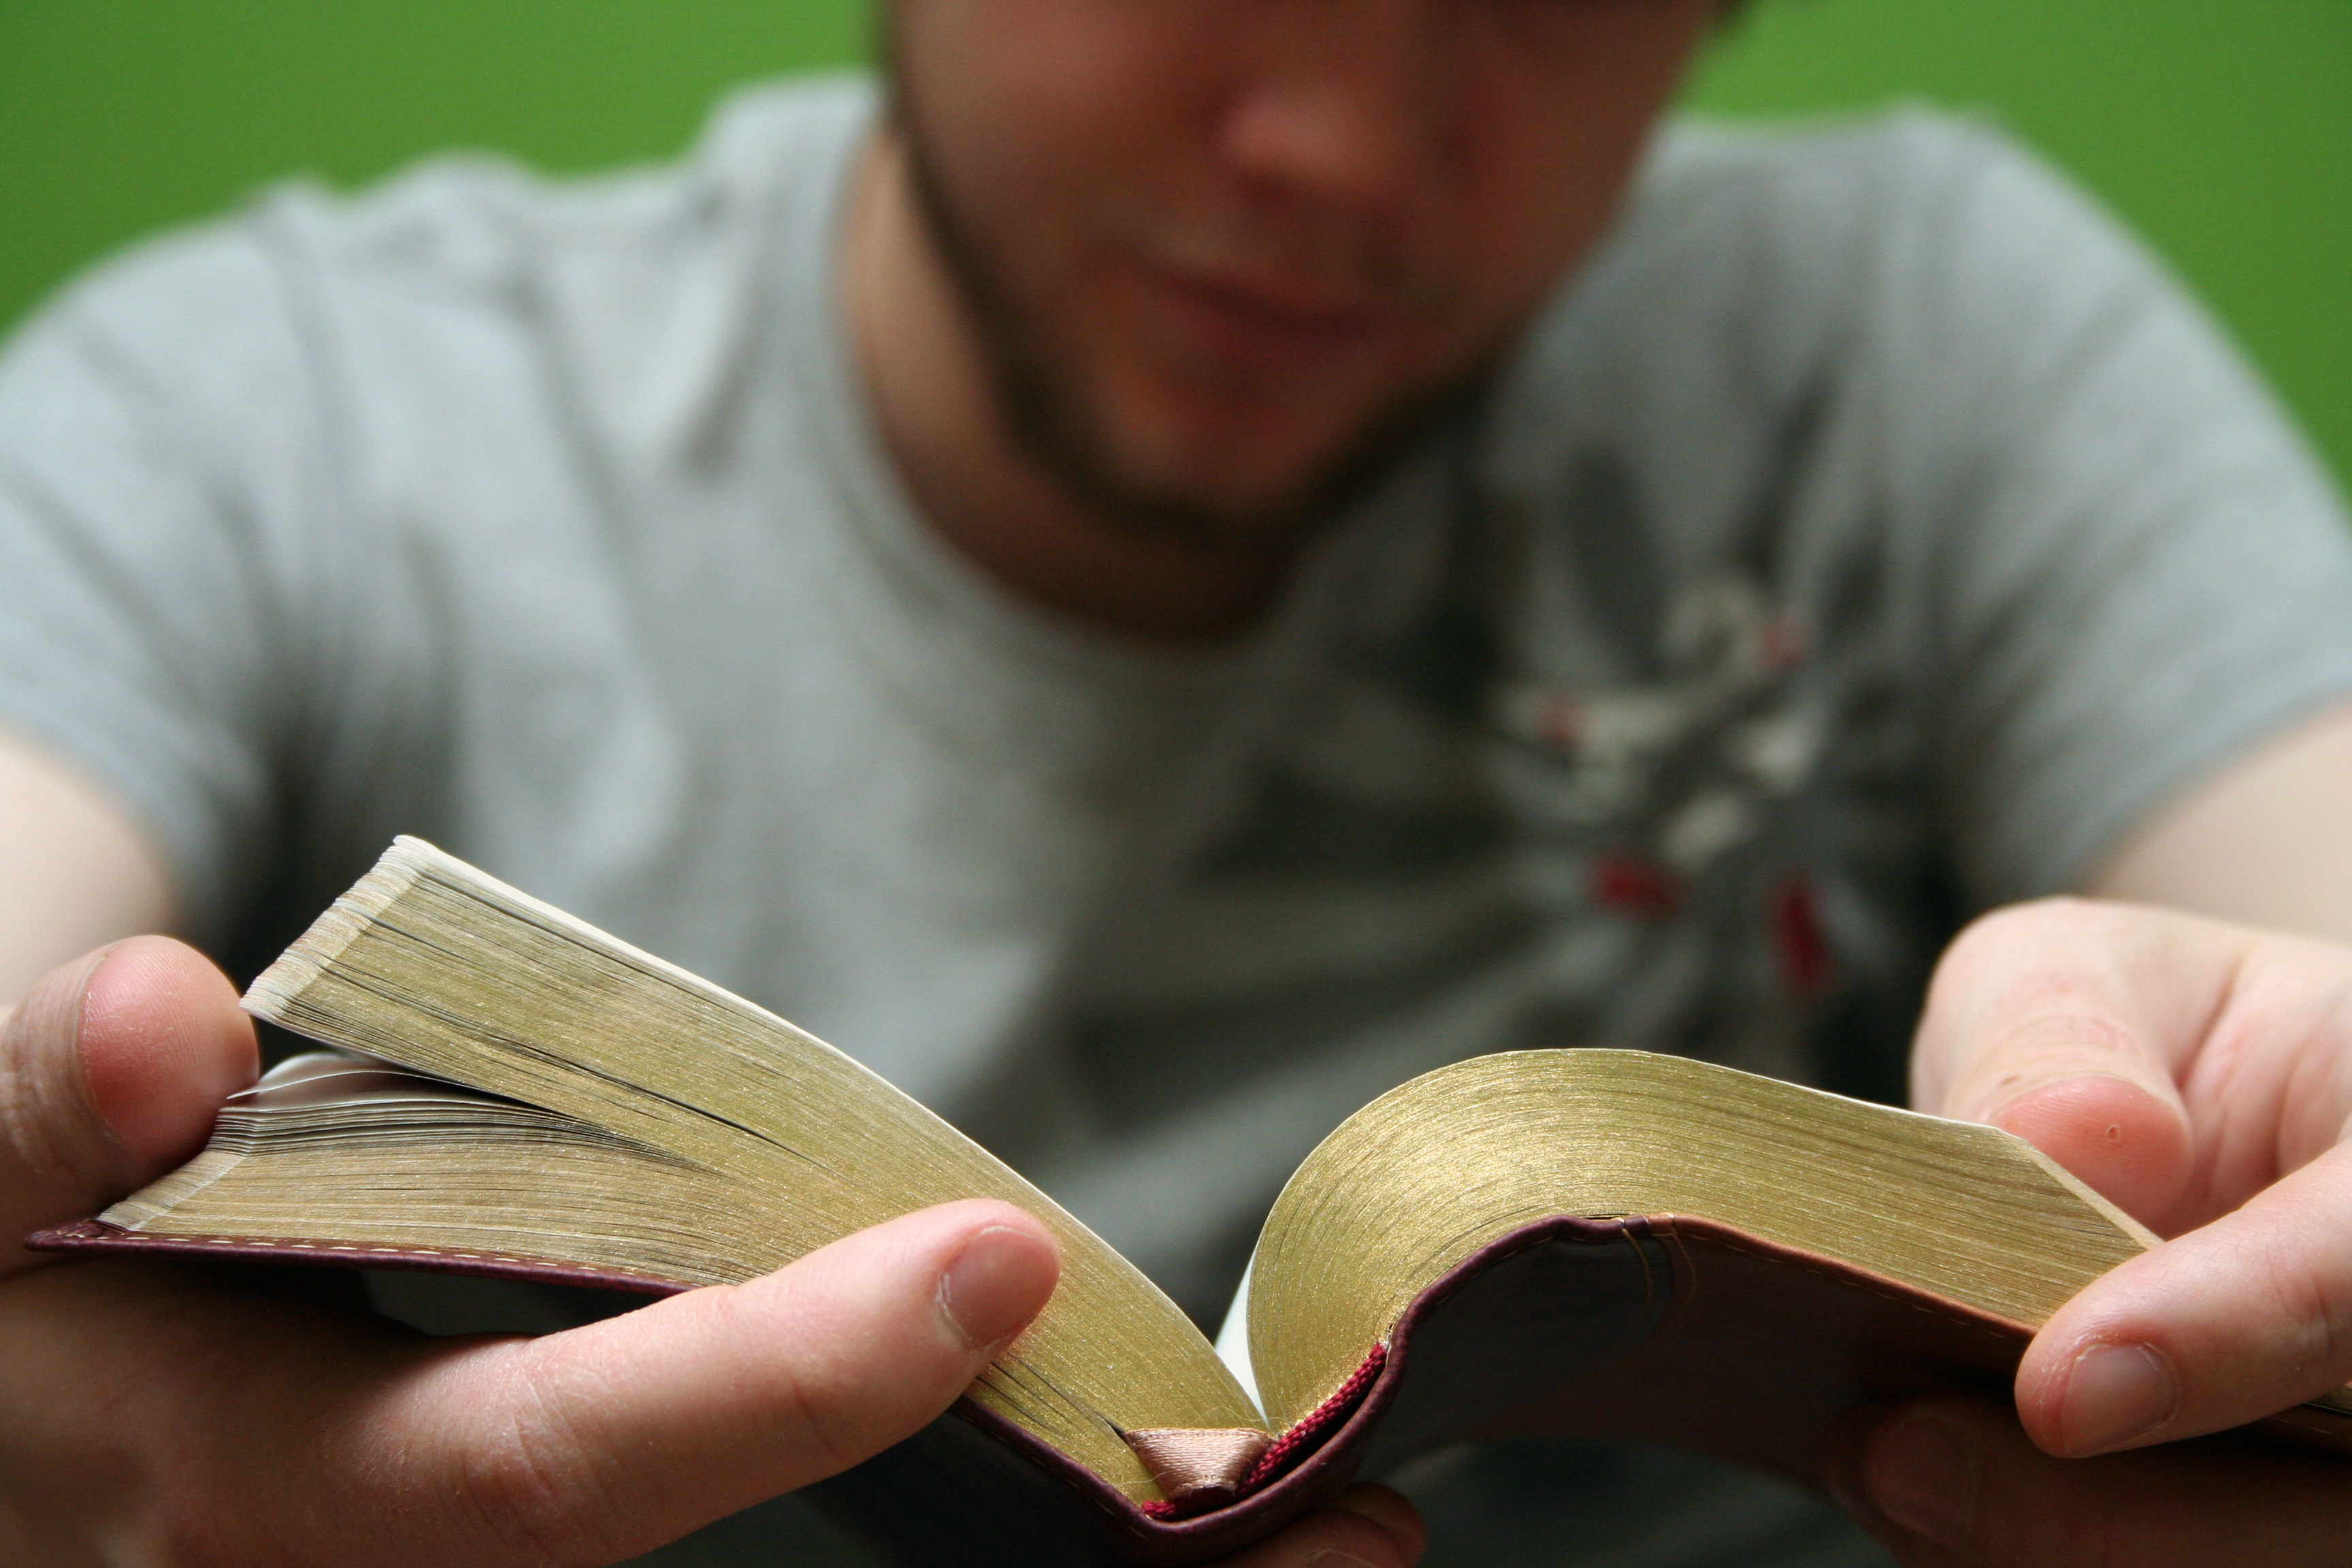 young man reading small bible